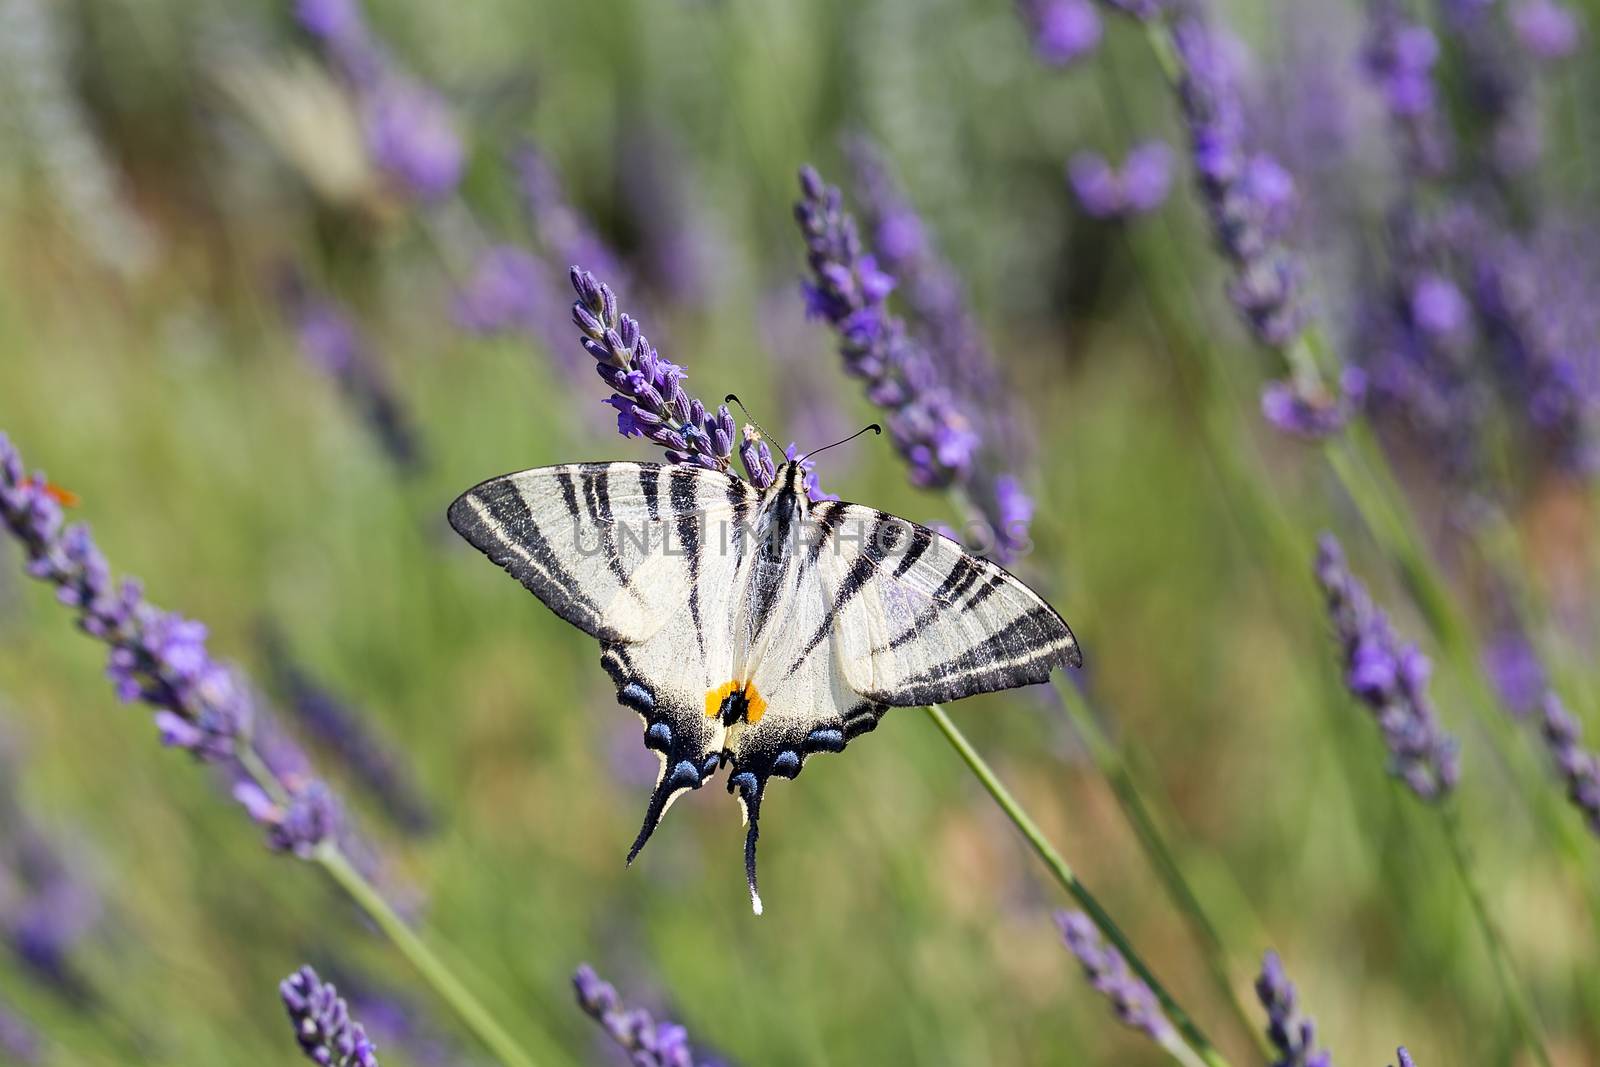 The scarce swallowtail (Iphiclides podalirius) butterfly on lavander flower by Tanja_g